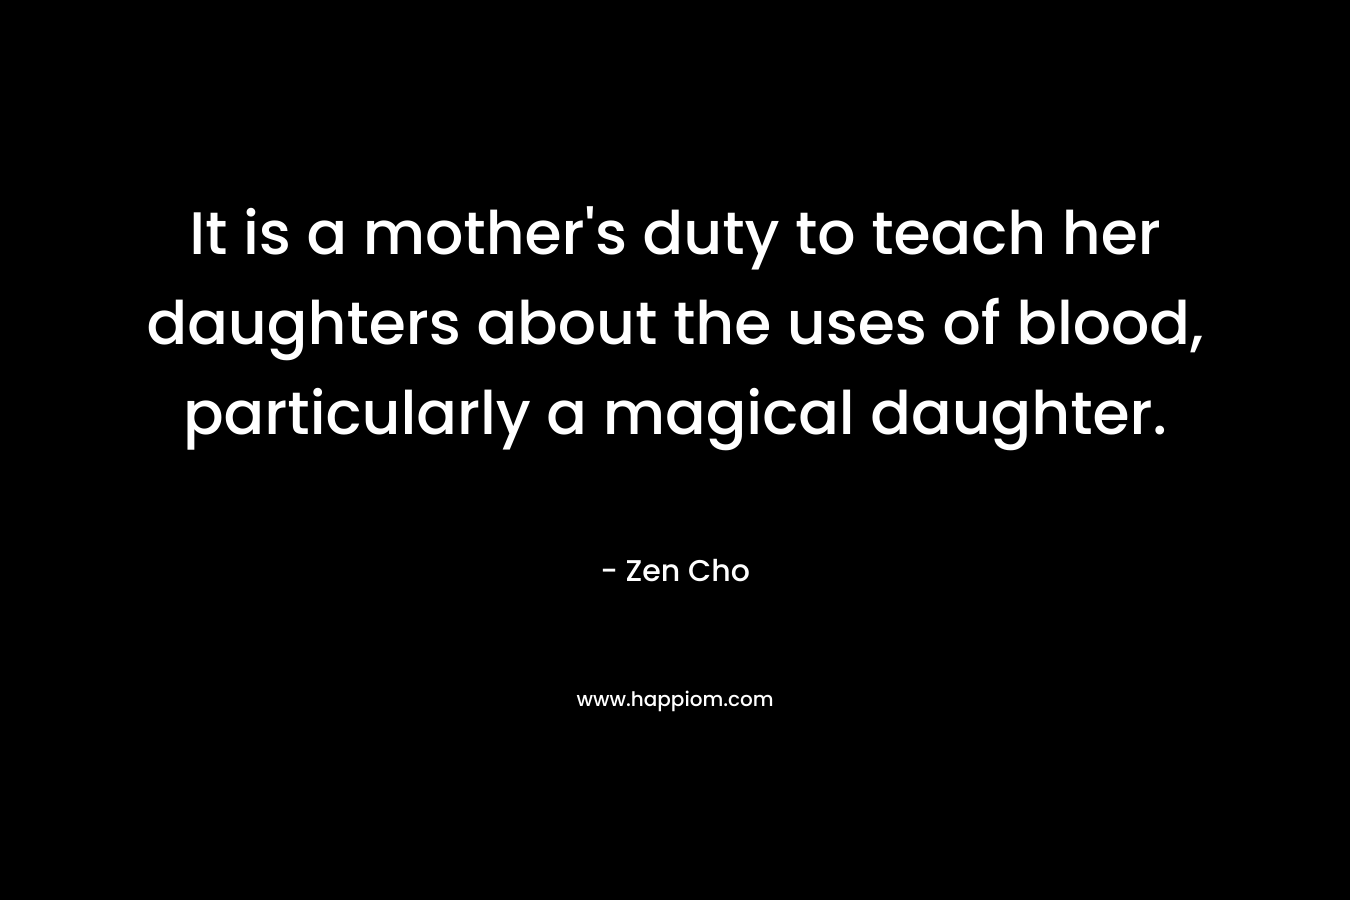 It is a mother’s duty to teach her daughters about the uses of blood, particularly a magical daughter. – Zen Cho